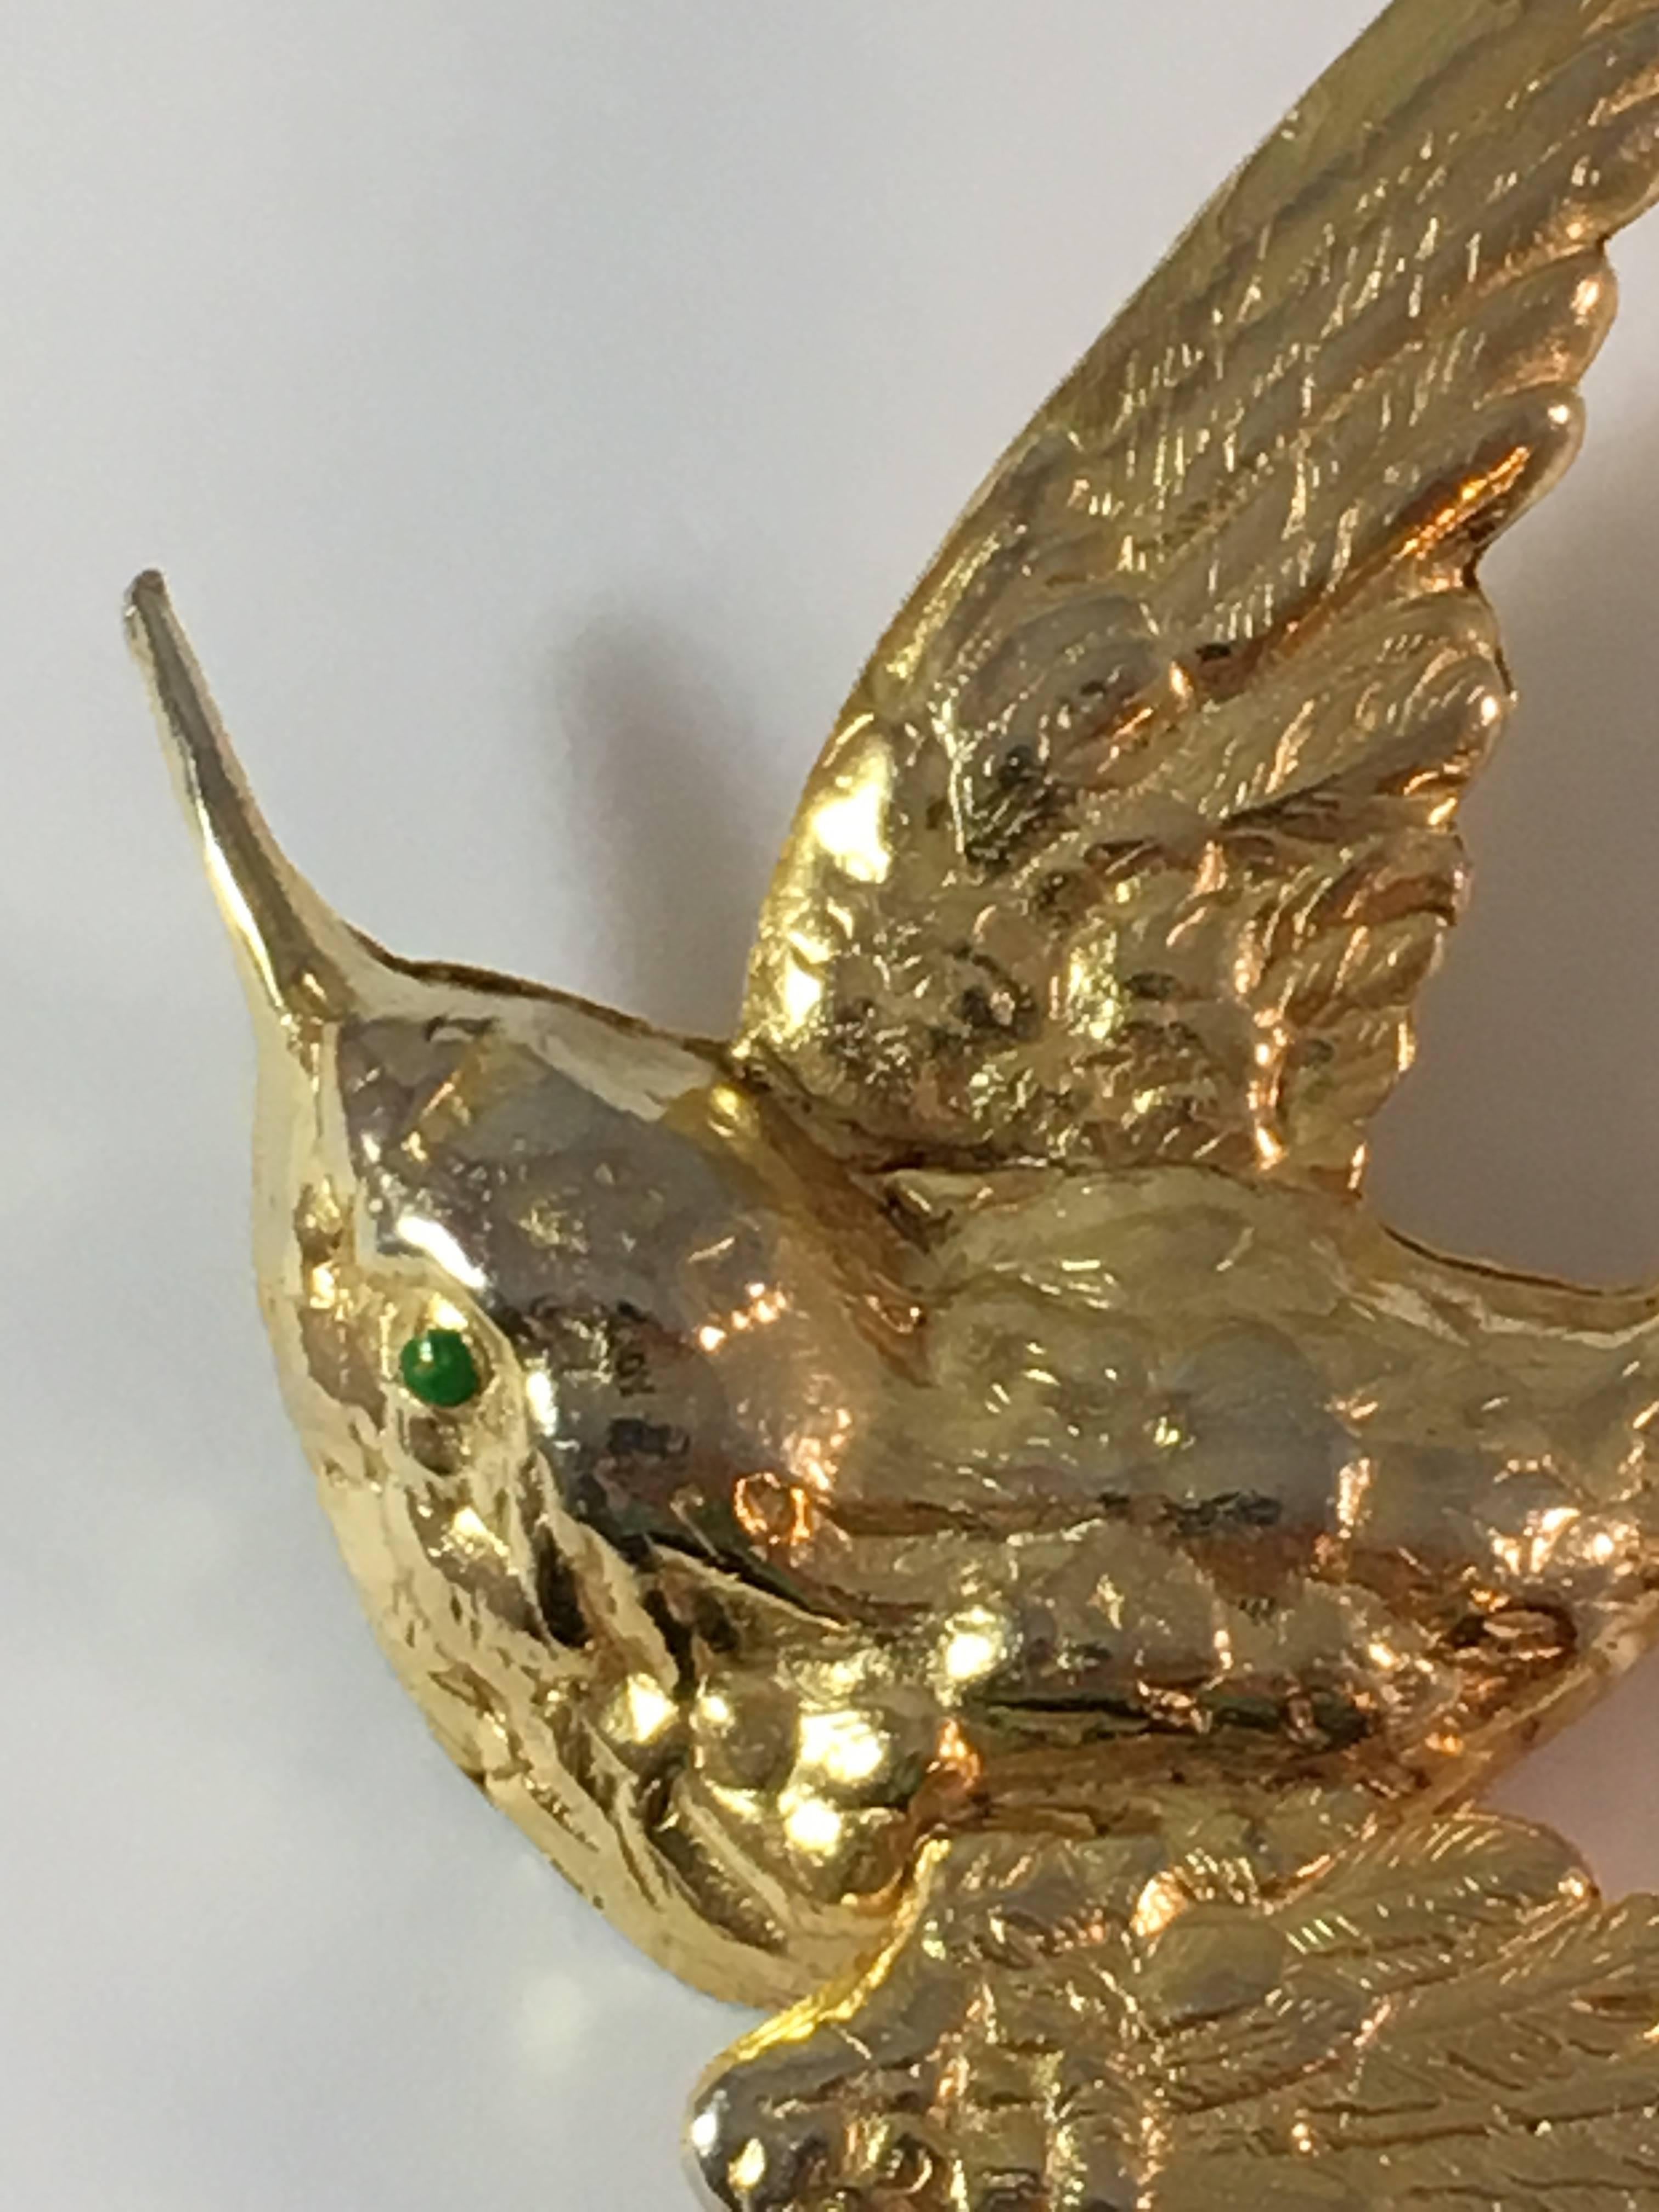 This is a beautifully made 1950s hummingbird brooch from Cadoro. It measures 2 3/4" wide by 2 5/8" tall. It is made from a gold-tone metal and has a green enamel eye. It is marked 'Cadoro' on the back in an oval plaque. It is in excellent